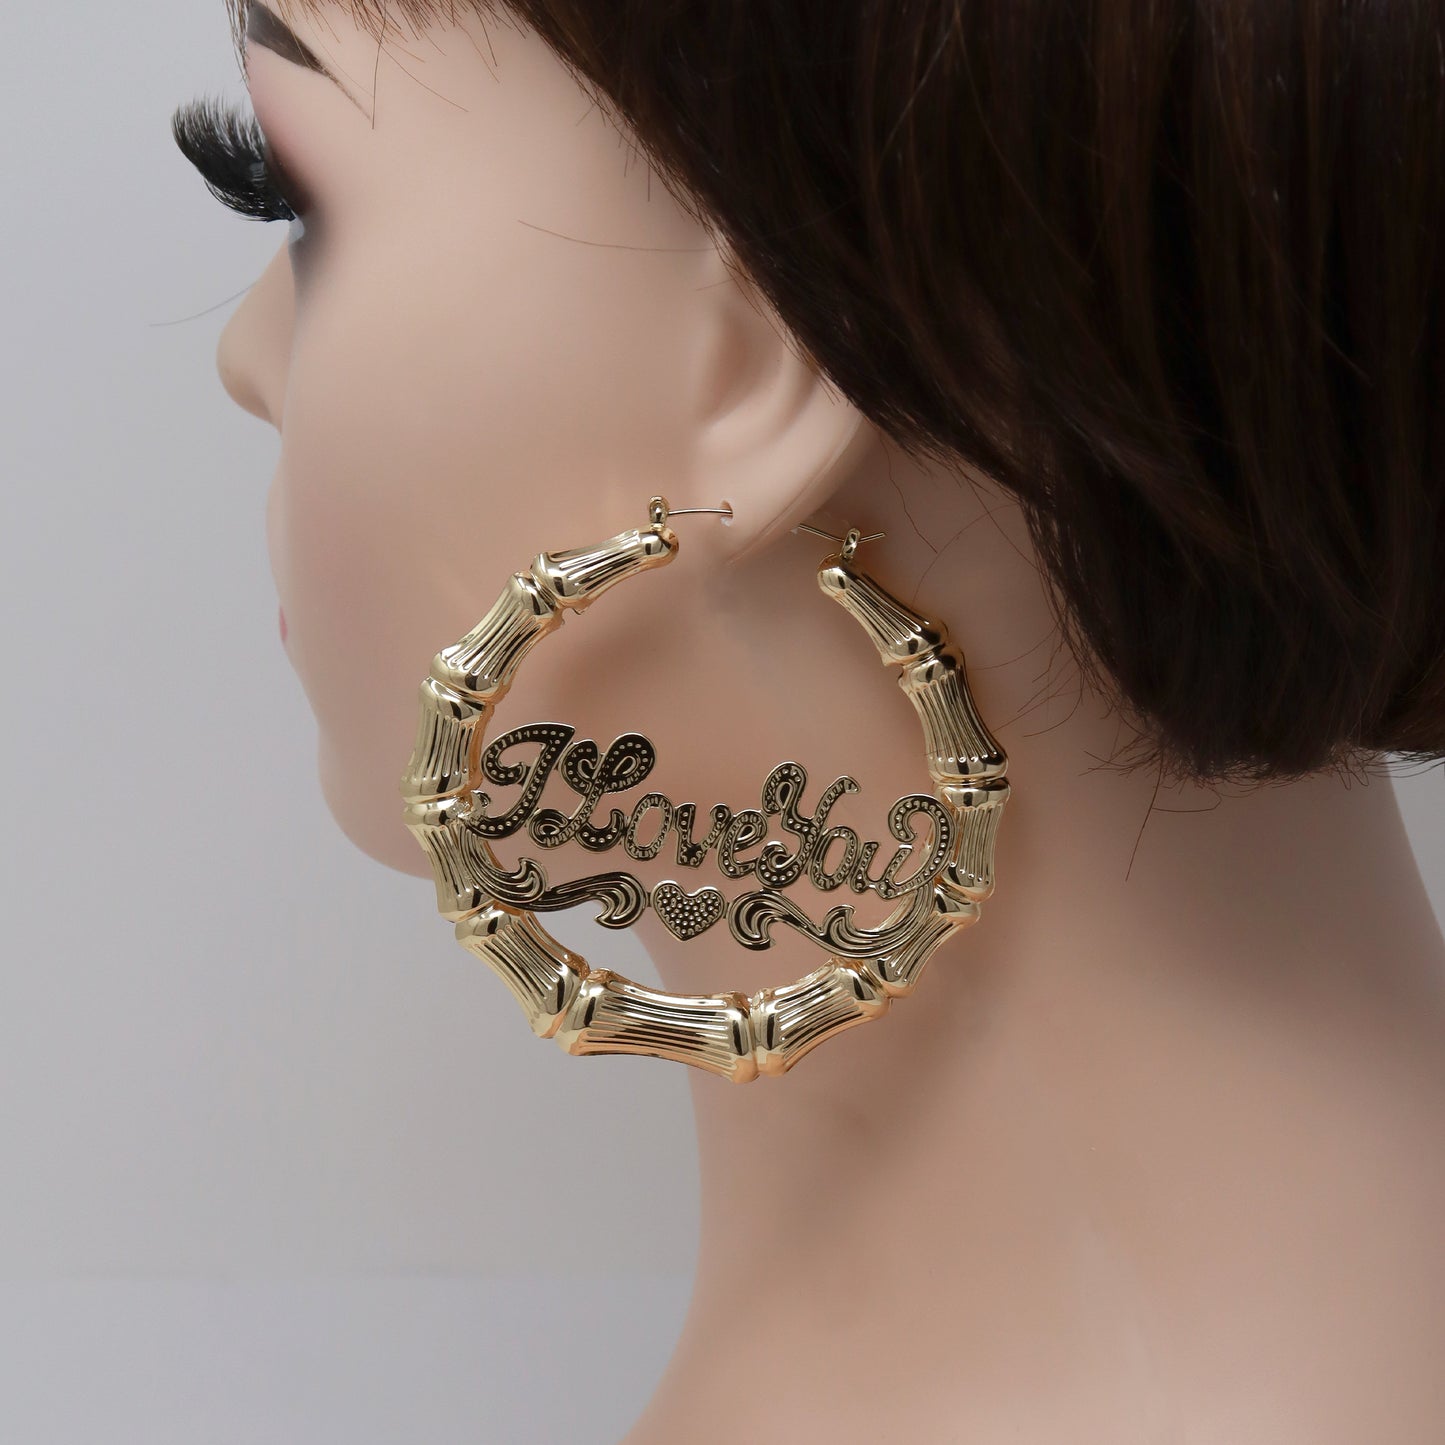 Gold Plated I Love You Round Bamboo Hoop Earrings-60mm